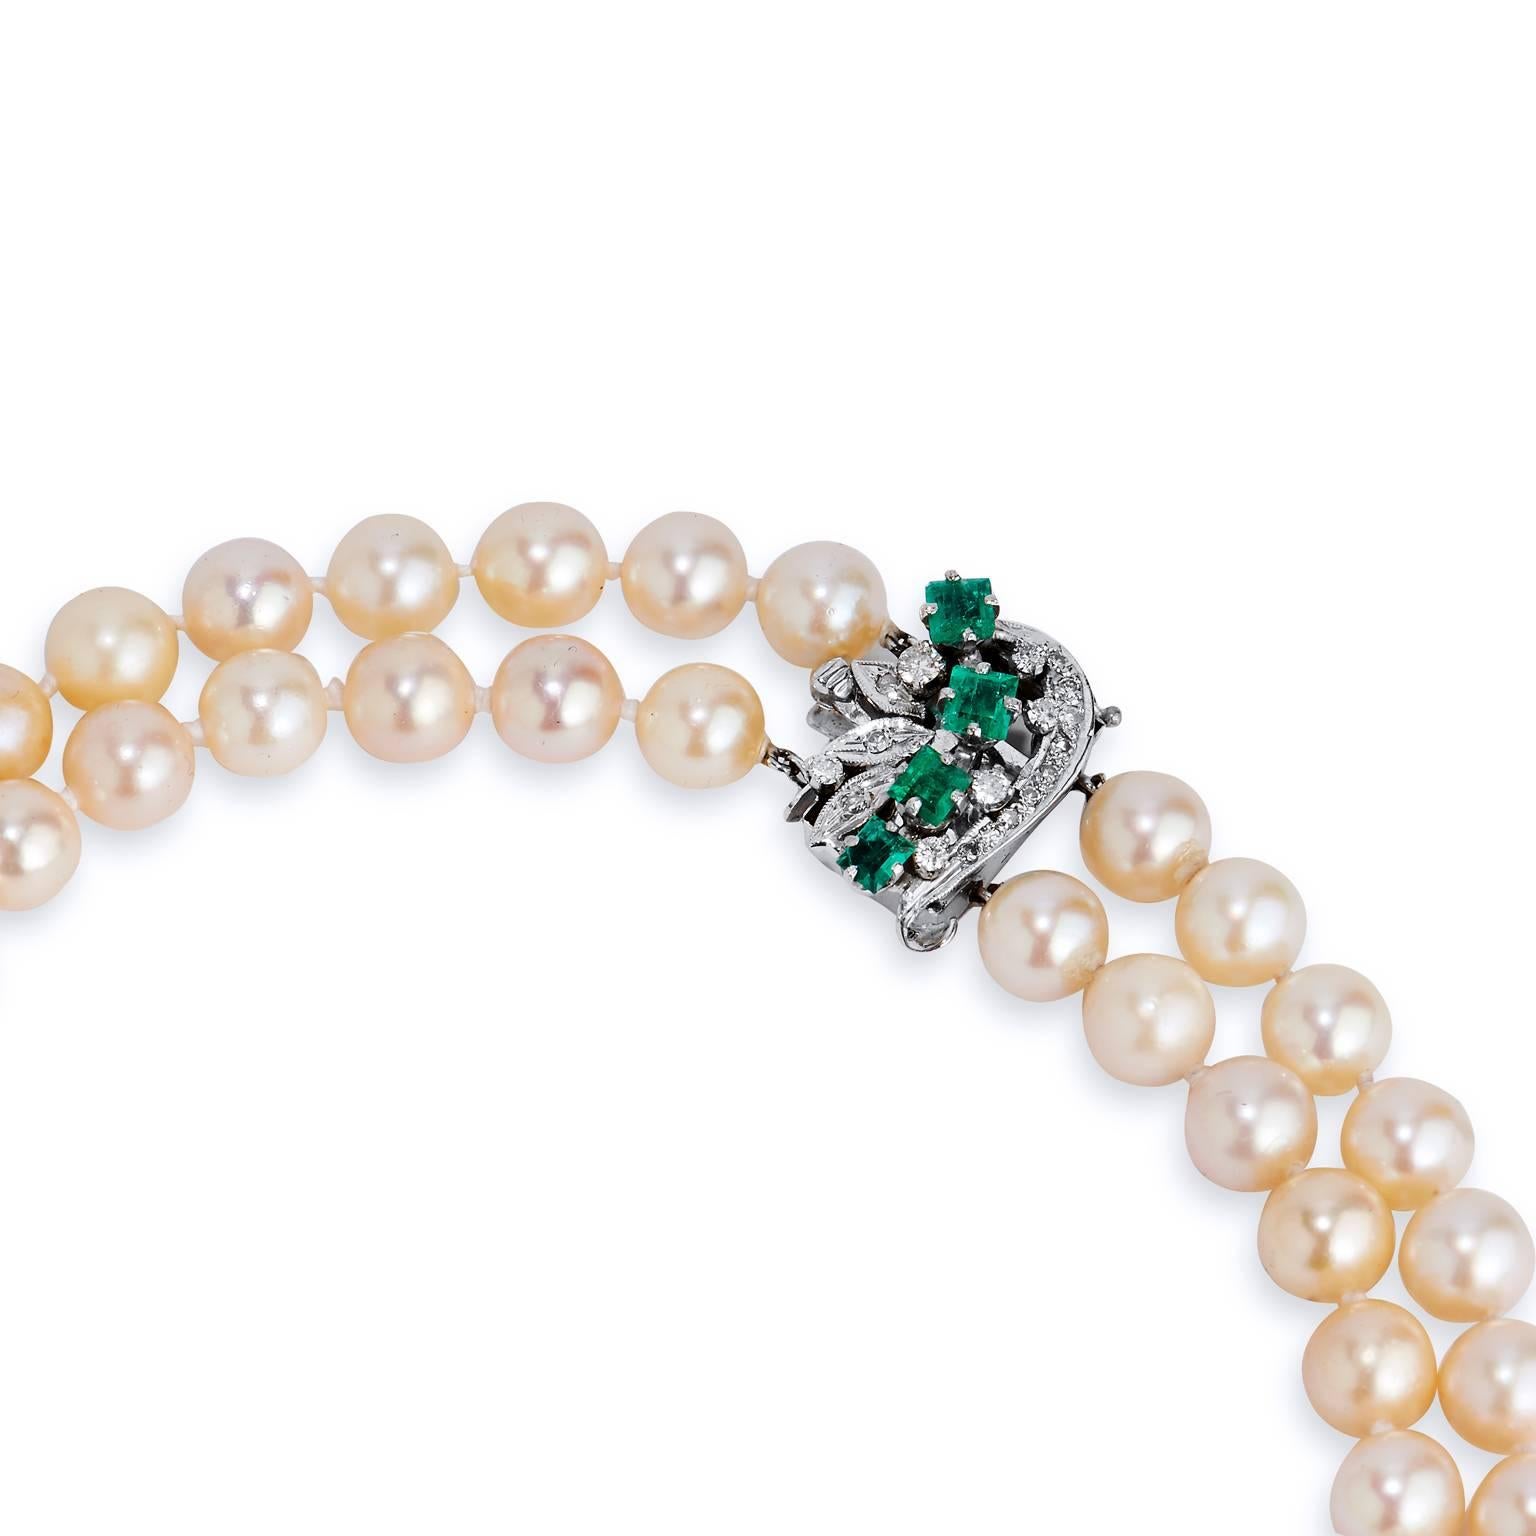 Crafted in 18kt white gold, this necklace is composed of Akoya Pearls measuring 7.5mm-8mm set in a beautiful double strand design. The clasp features approximately 1.50ct of Colombian Emeralds sprinkled with  approximately .25cts of single cut